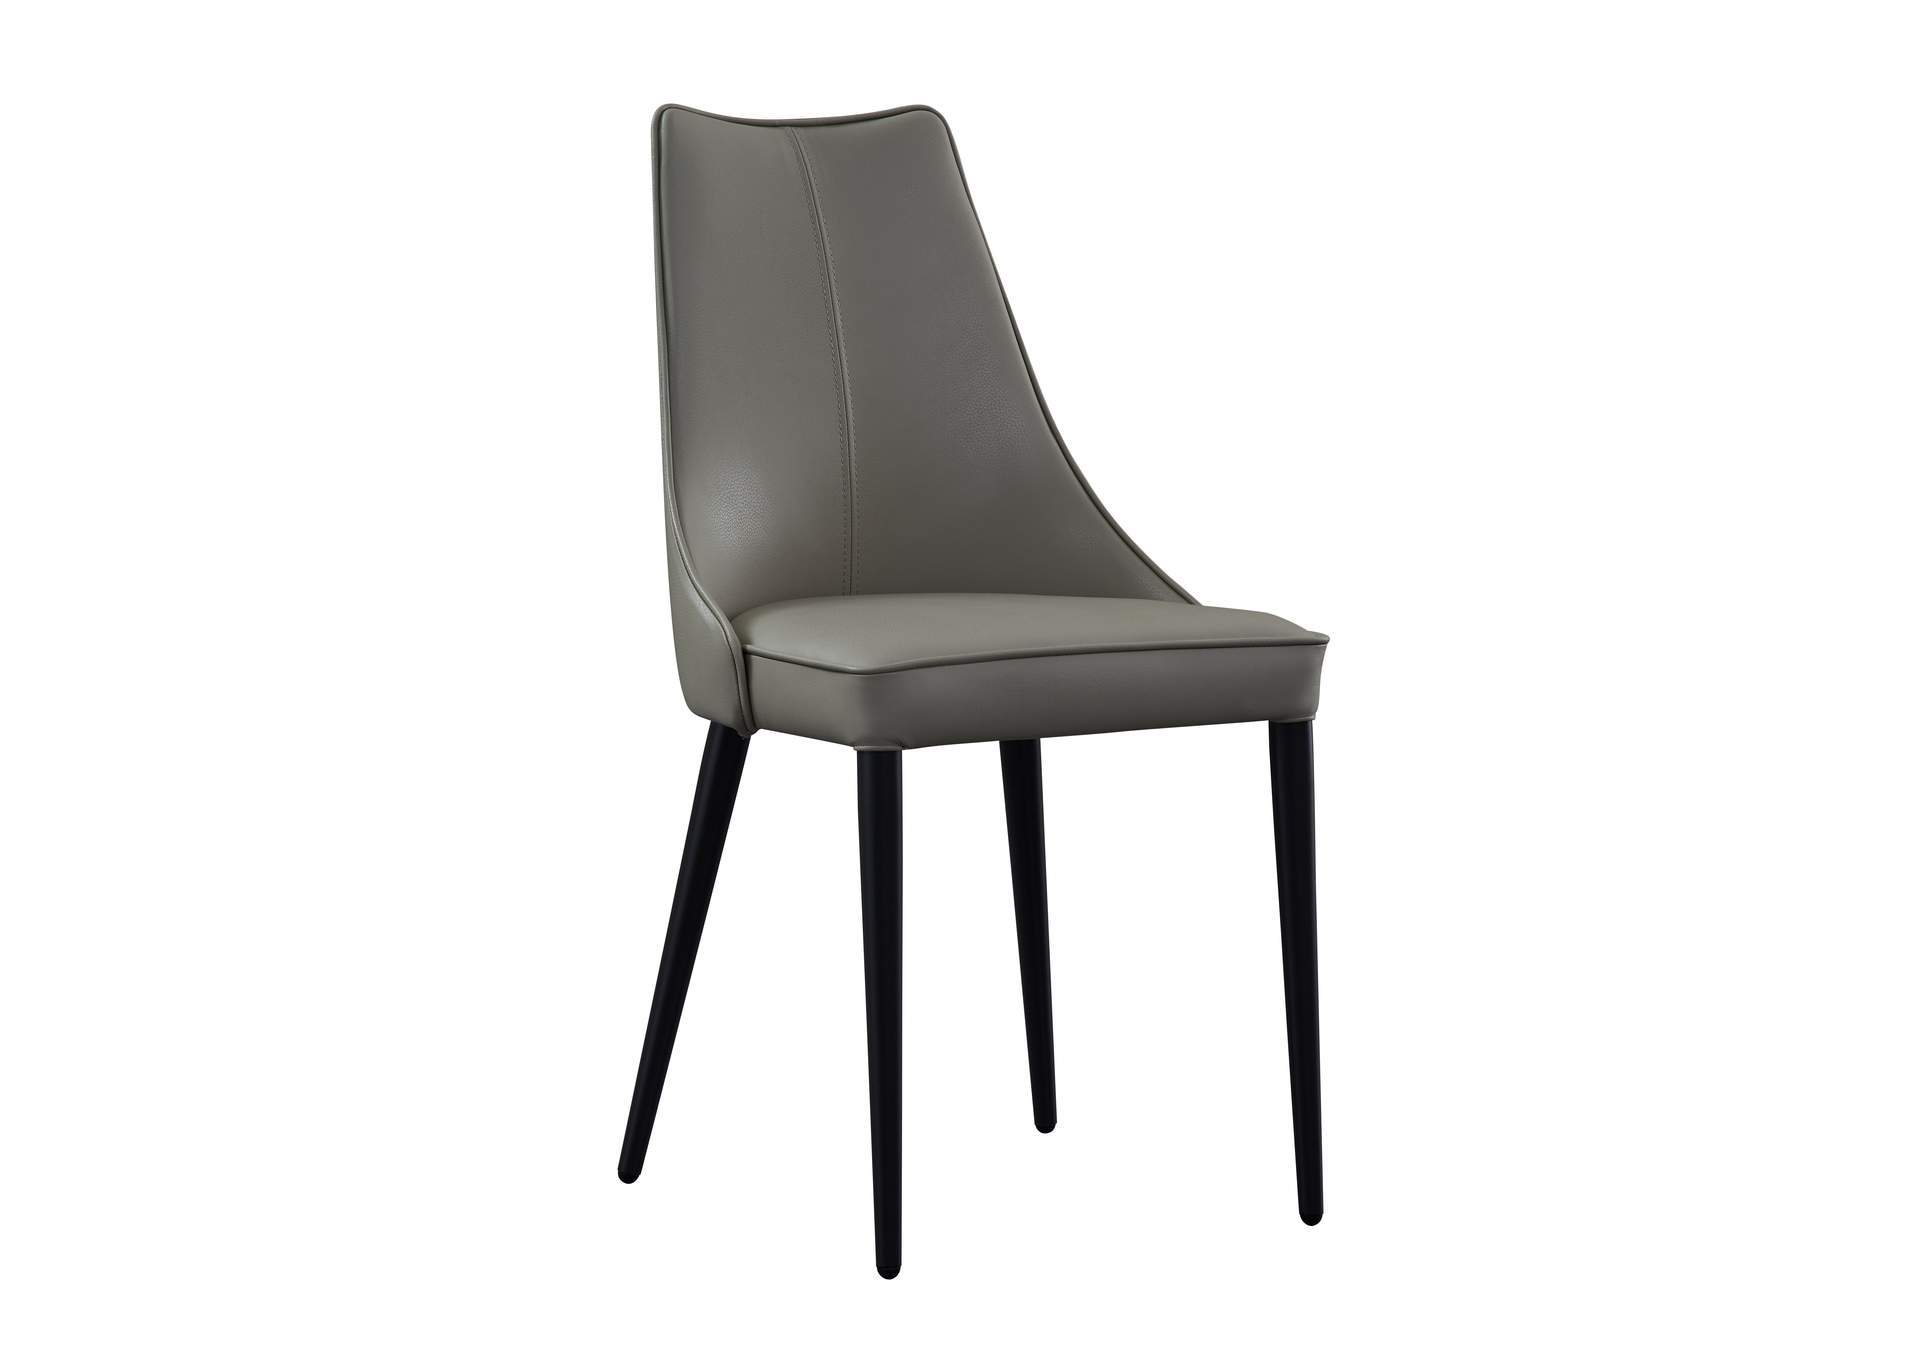 Milano Leather Dining Chair In Light Grey,J&M Furniture